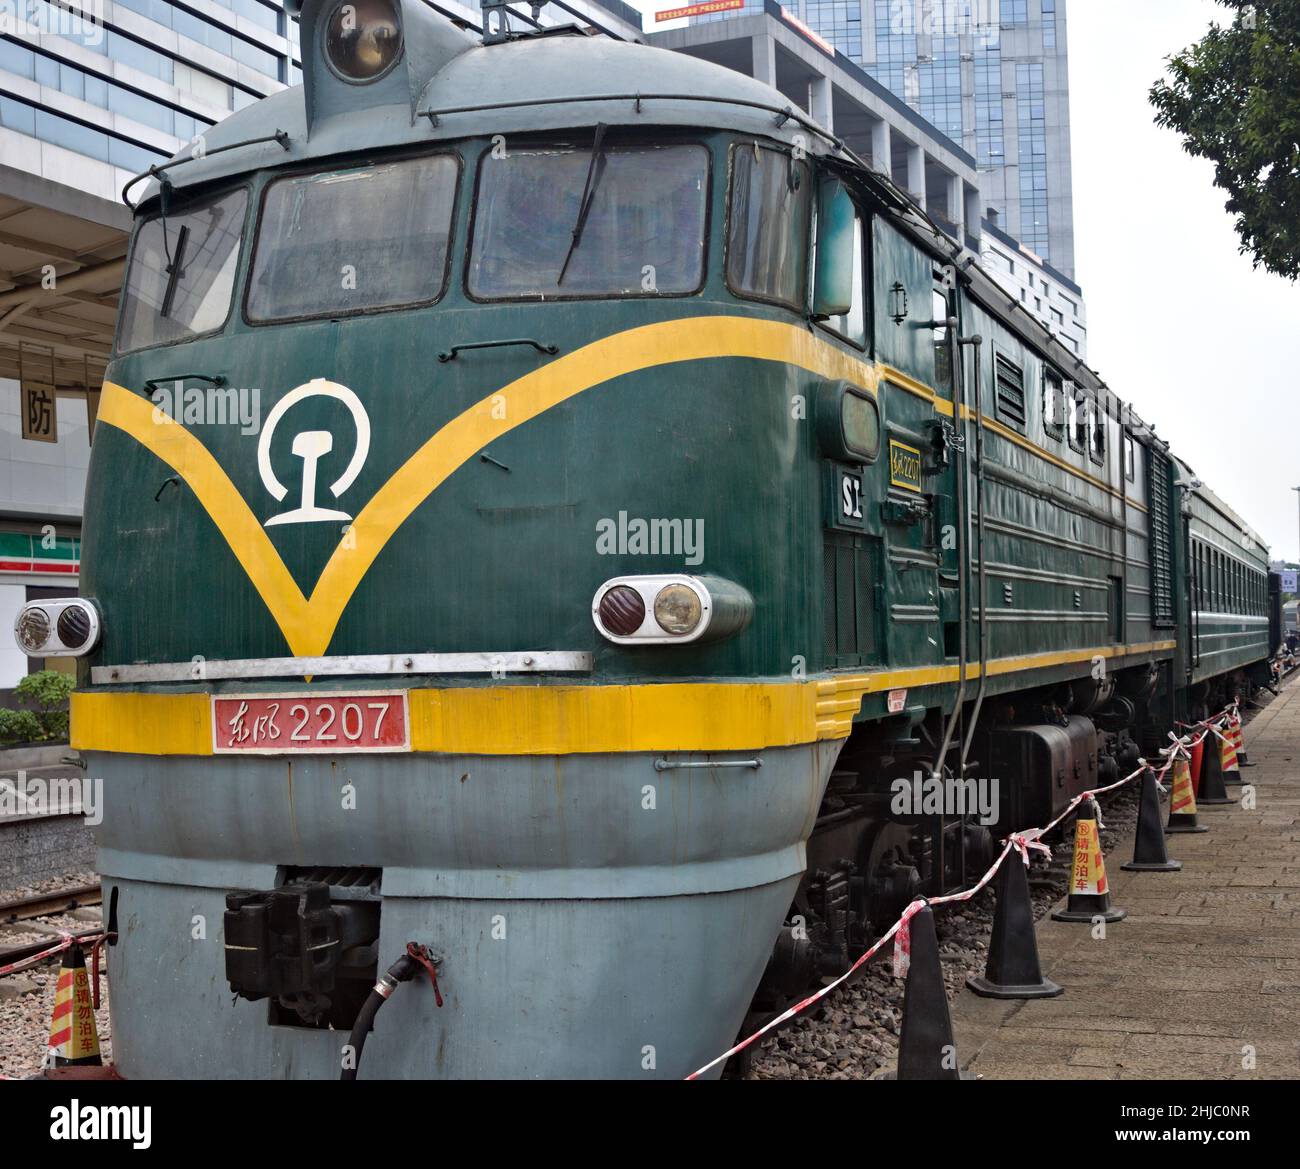 Yesteryear Chinese train decommissioned in Shenzhen, China Stock Photo